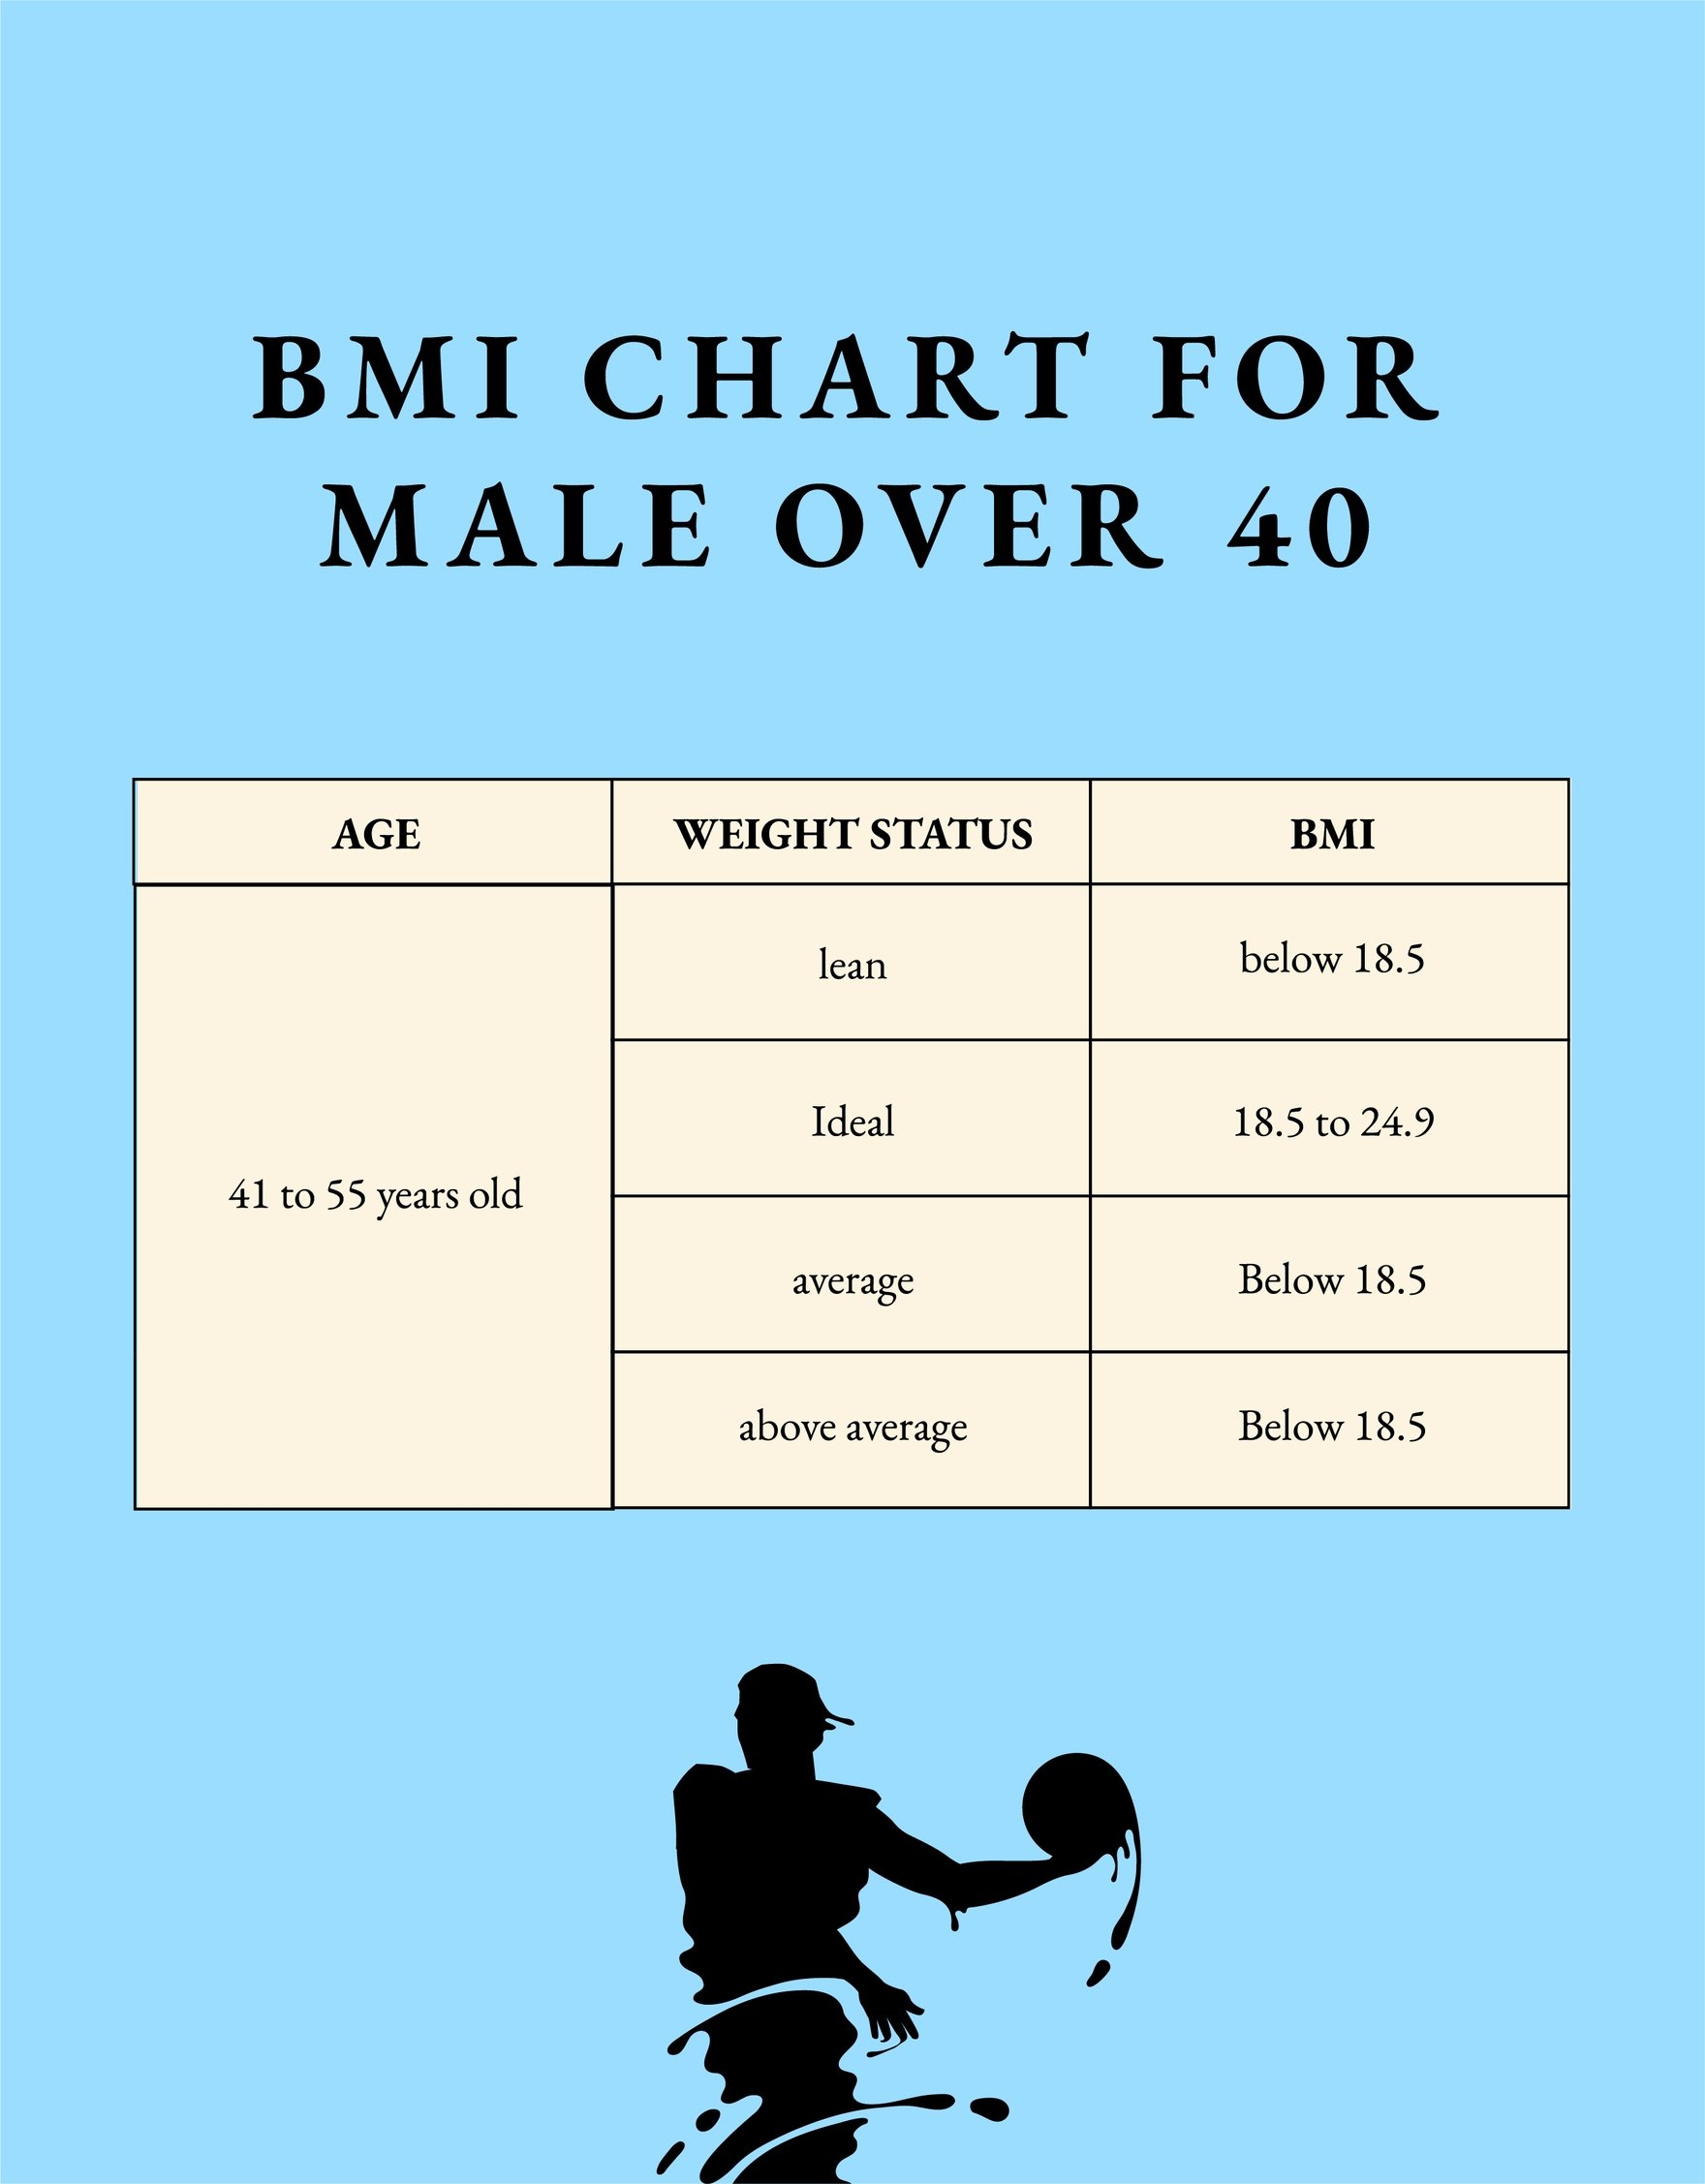 BMI Chart For Male Over 40